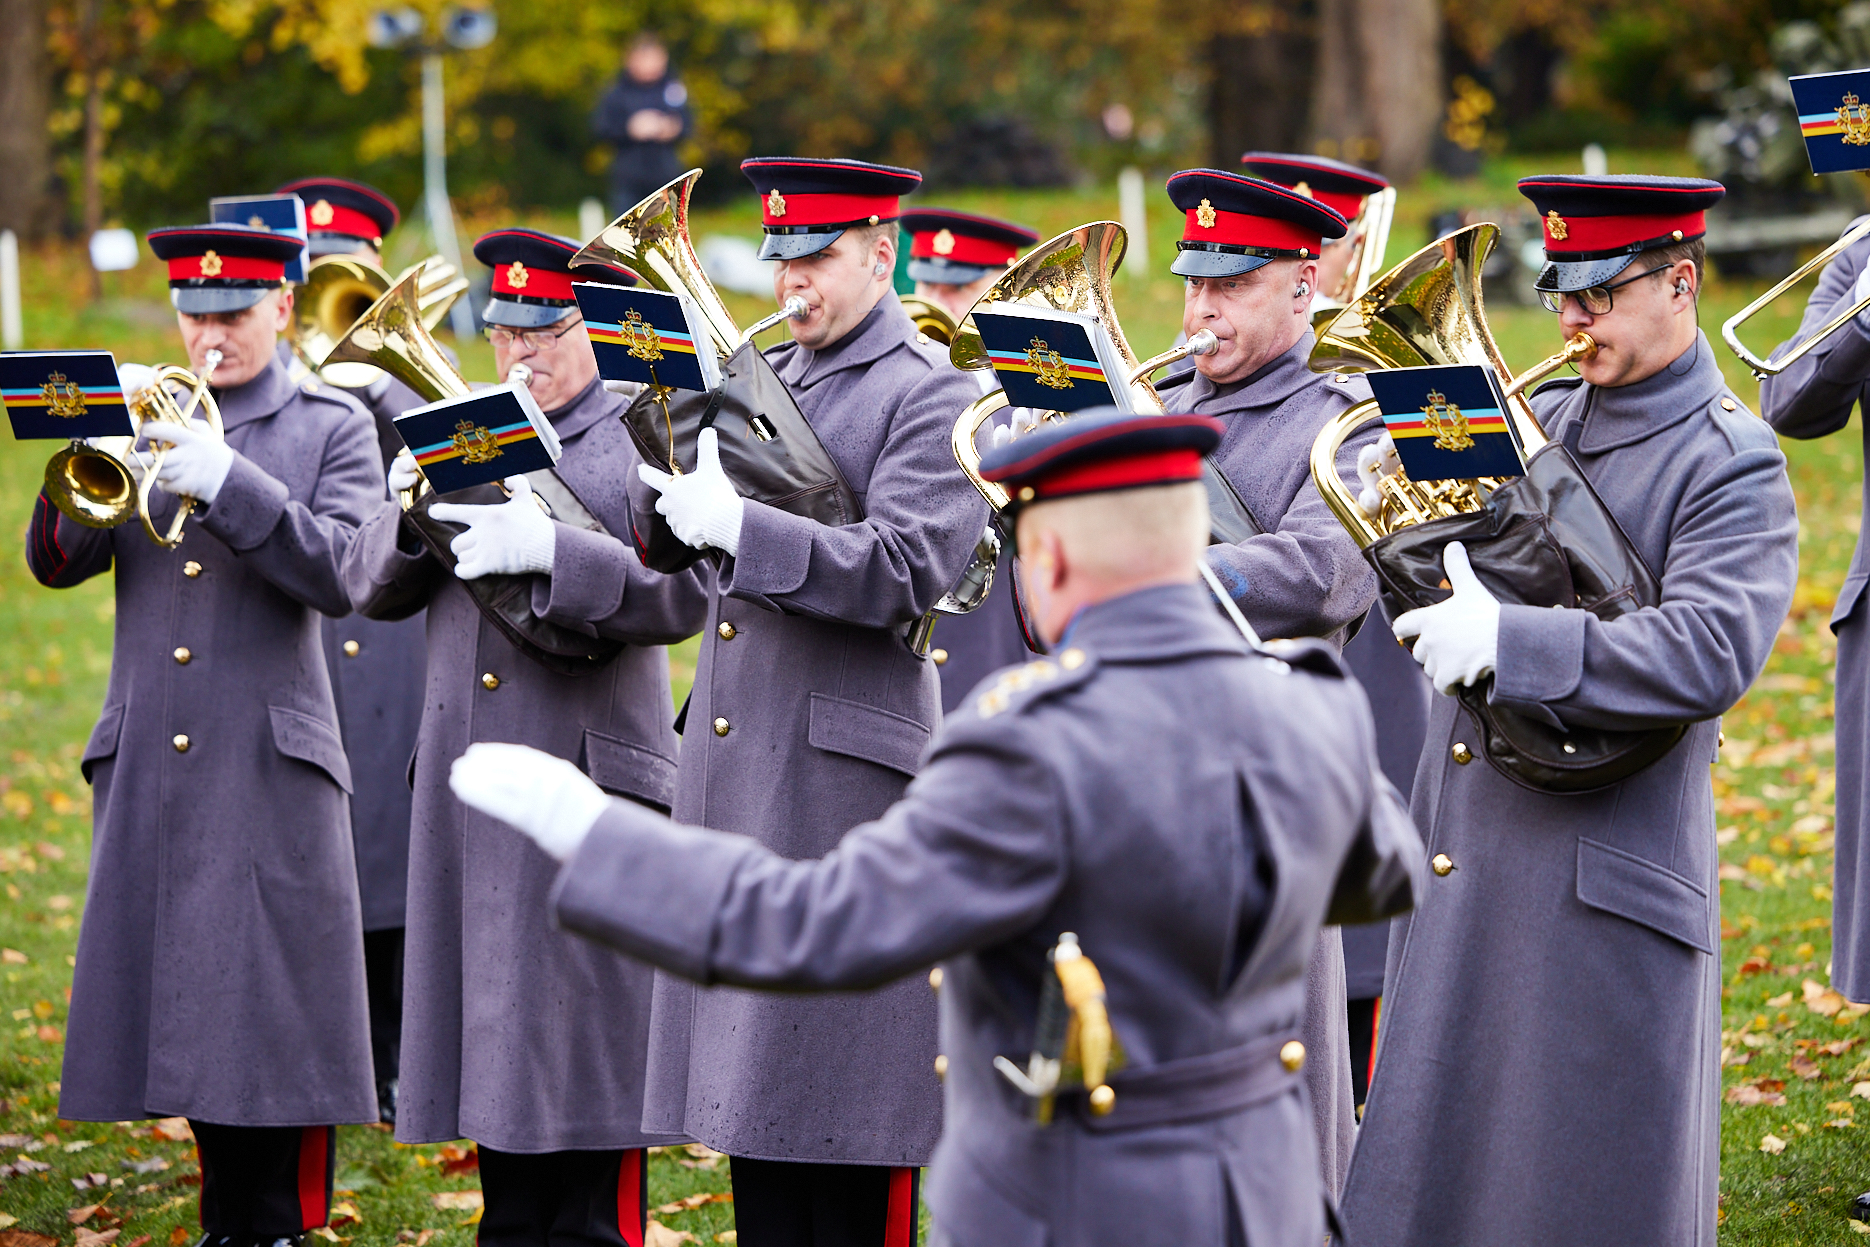 musicians in uniform playing their instruments